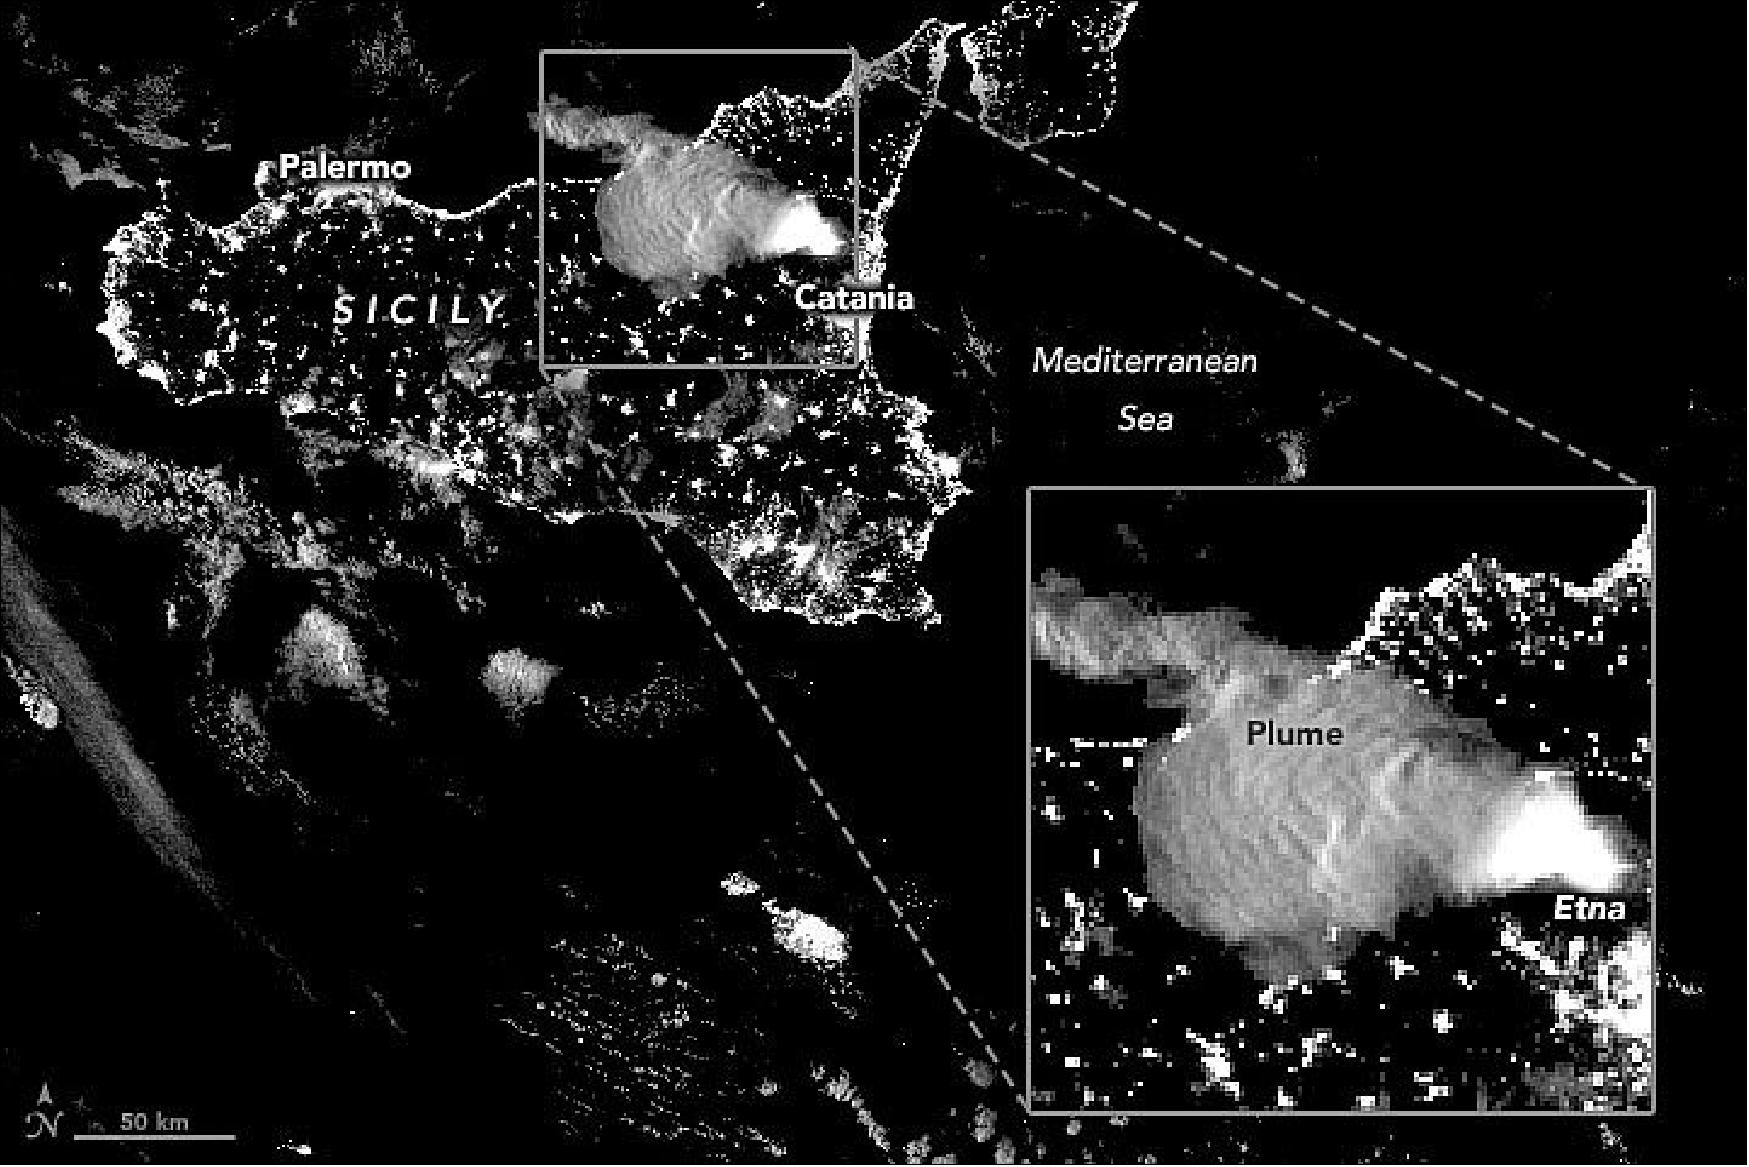 Figure 33: Intense lava fountains and lava flows illuminated a volcanic plume spreading across Sicily during an unusually pitched night of activity at the Italian volcano. At 1:37 a.m. local time (00:37 Universal Time) on February 23, 2021, the Visible Infrared Imaging Radiometer Suite (VIIRS) on the NOAA-20 satellite captured an image showing one of several volcanic plumes Etna has produced recently. At the time, the partially illuminated plume was spreading northwest across Sicily. It deposited a layer of ash in Palermo before heading north toward Sardinia (image credit: NASA Earth Observatory image by Joshua Stevens, using VIIRS day-night band data from the Joint Polar Satellite System and Landsat data from the U.S. Geological Survey. Story by Adam Voiland)